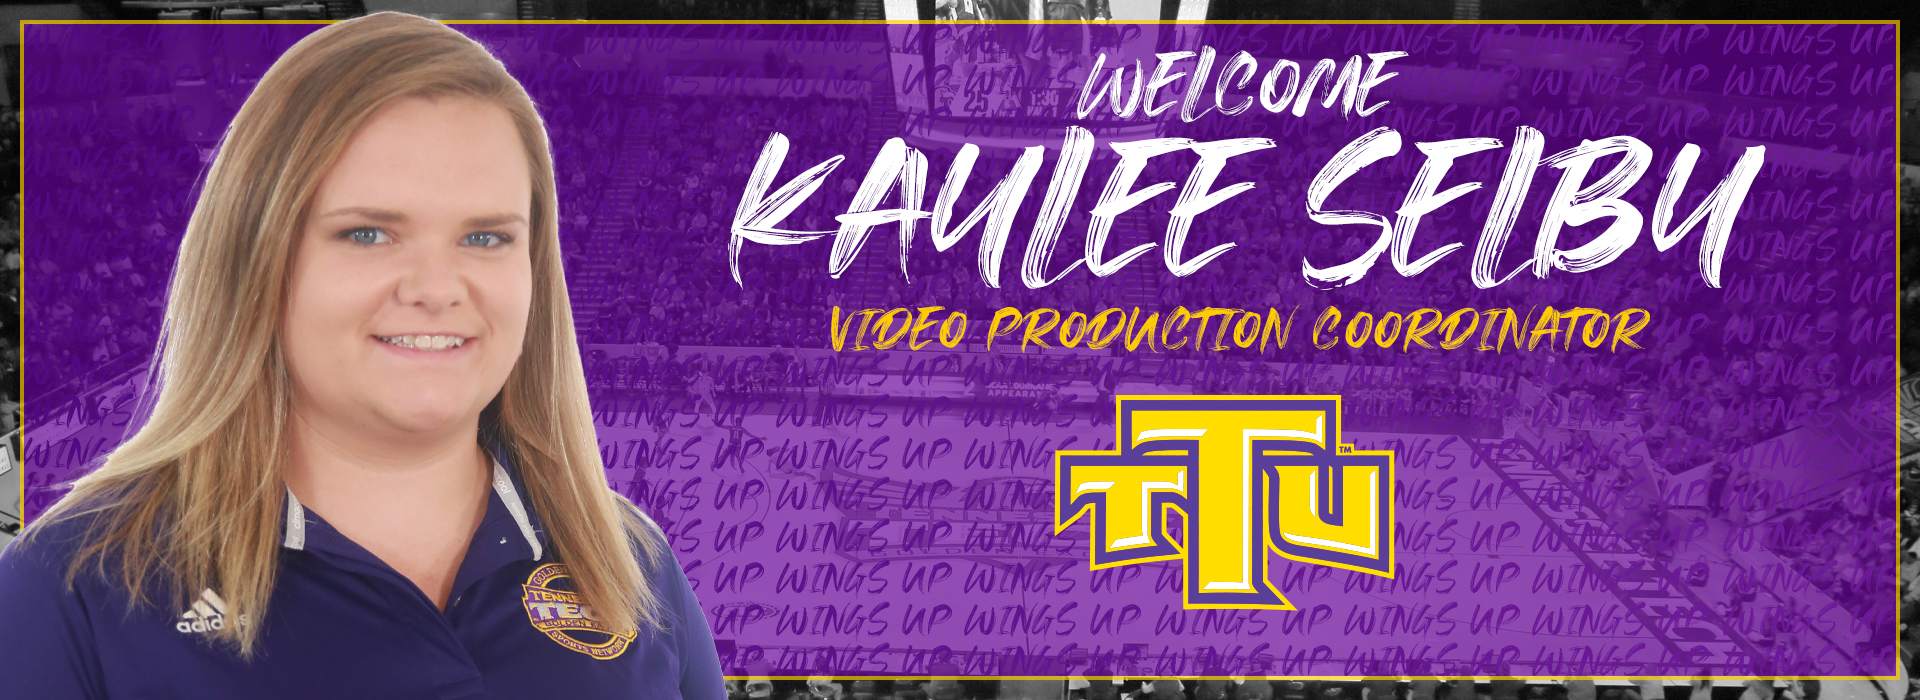 Selby added to Tech Athletics video production staff